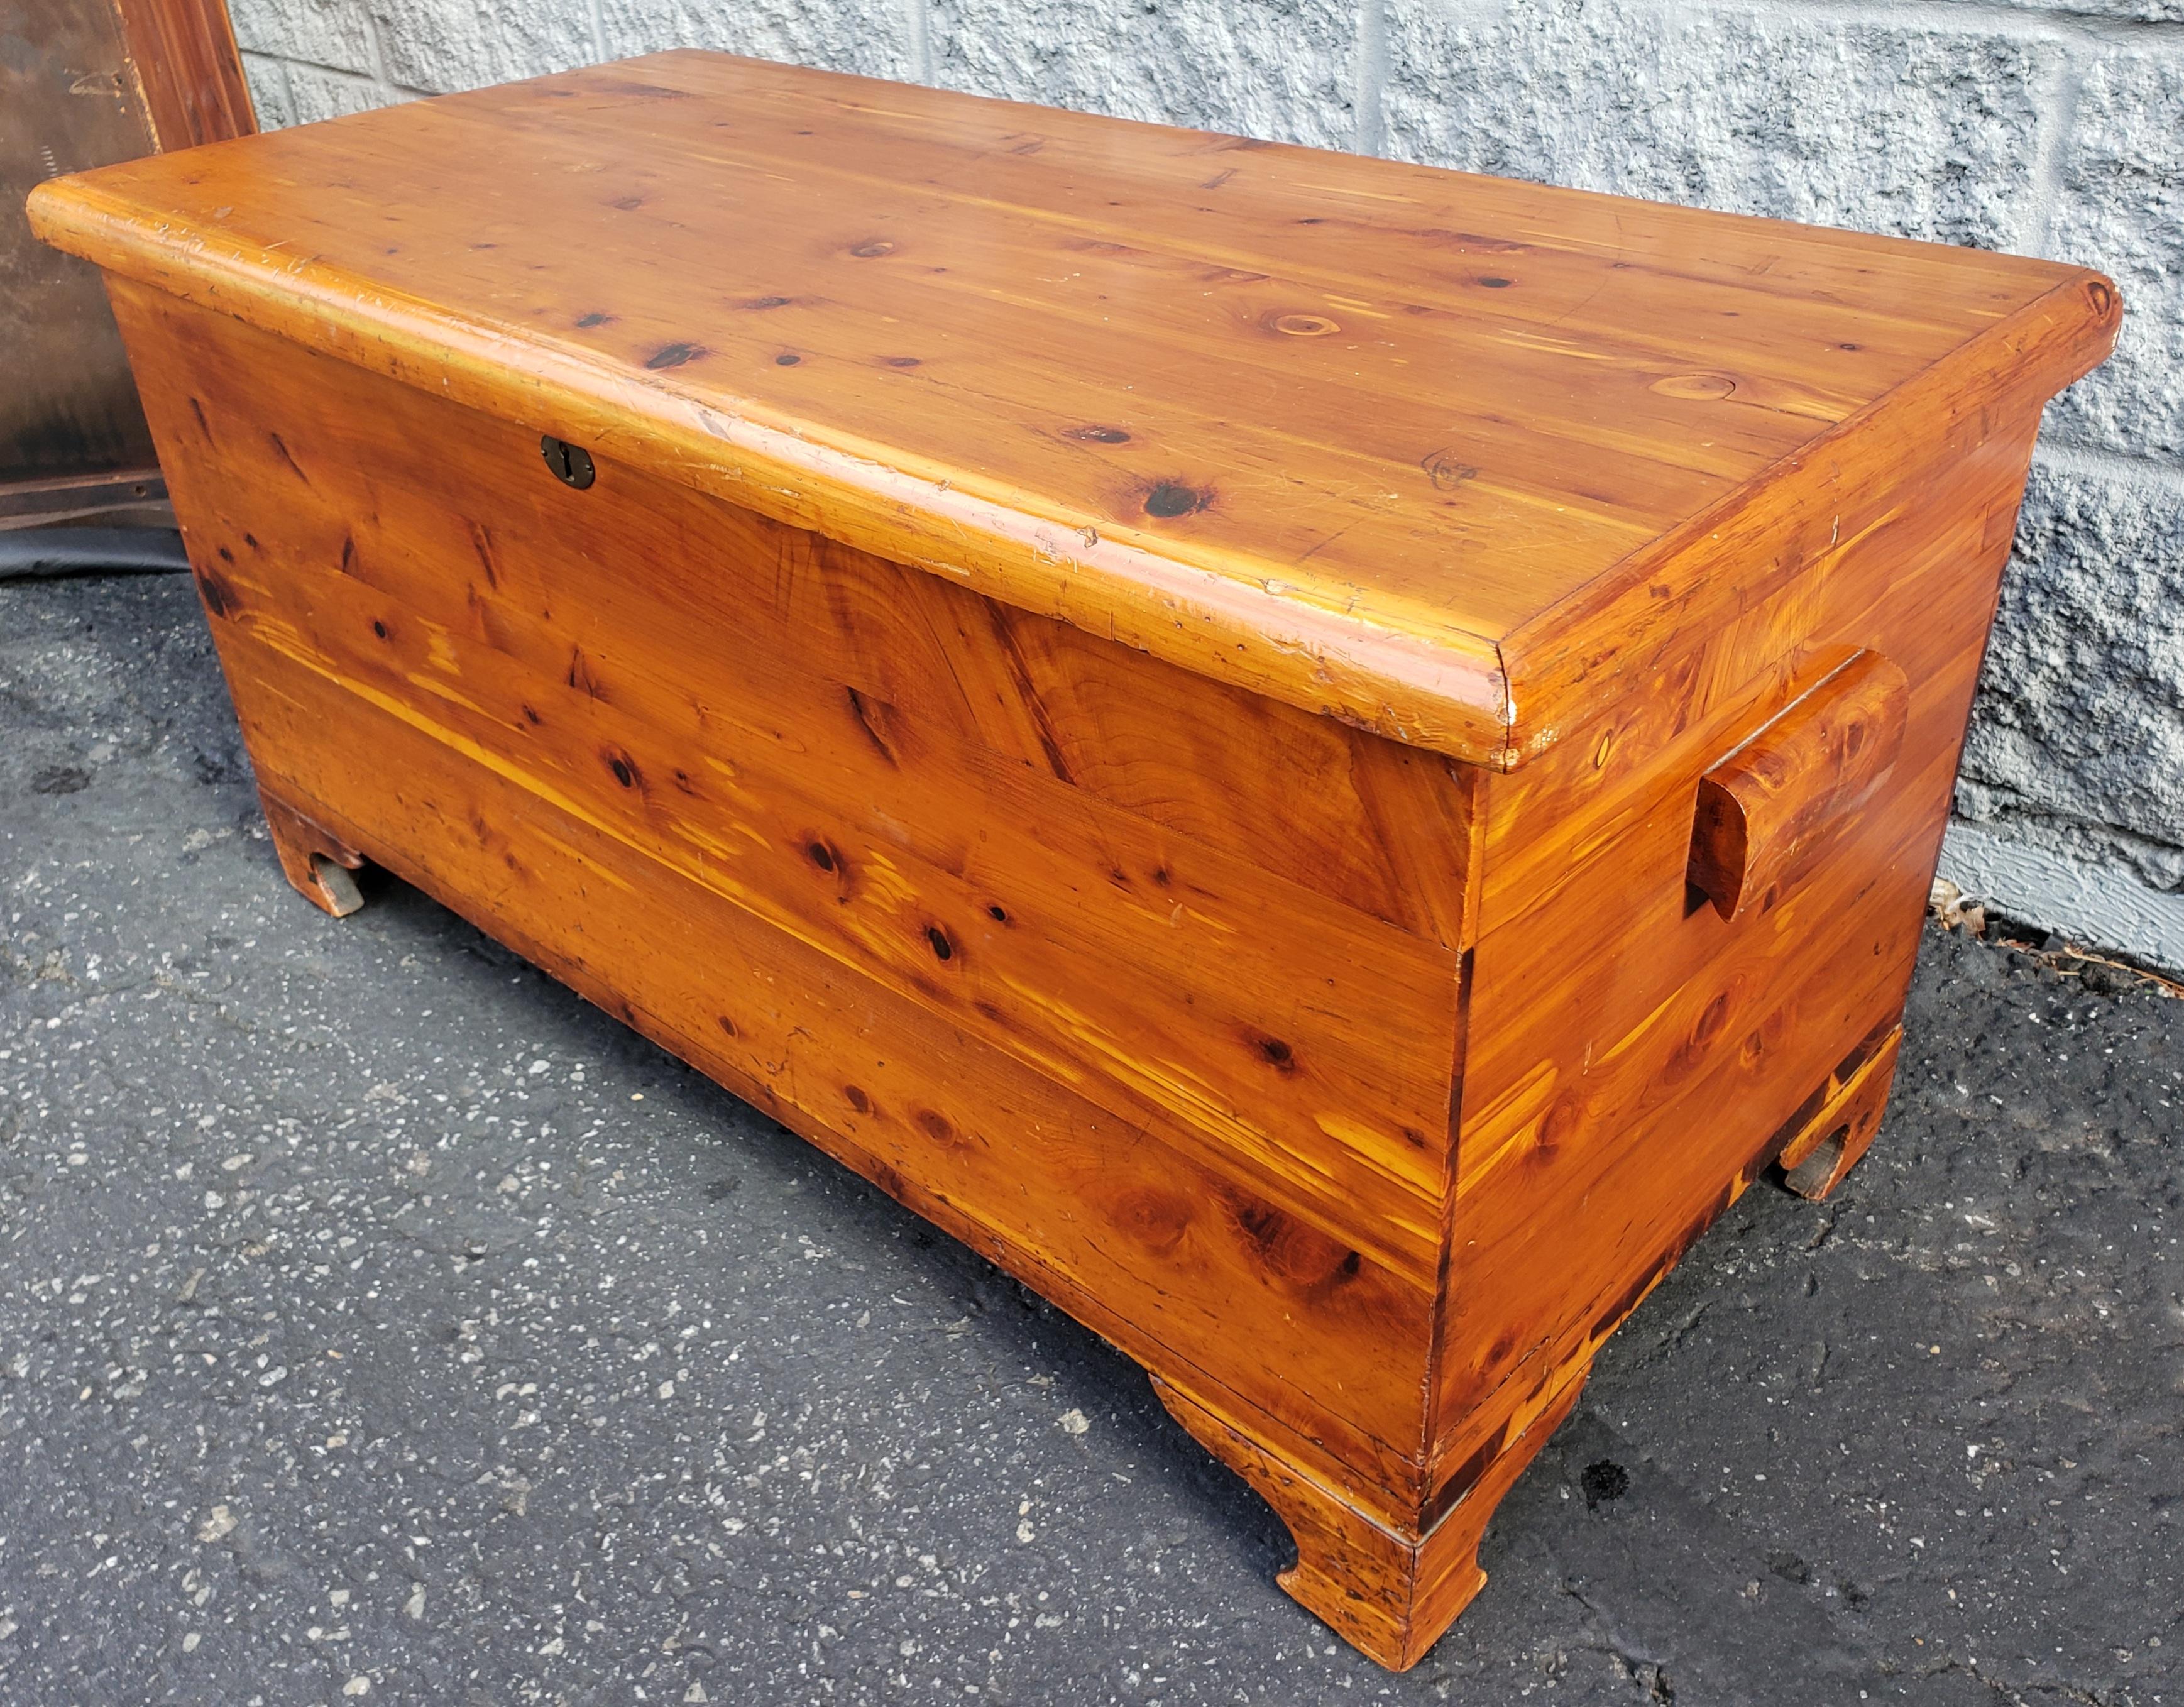 Great old pine chest. Cedar lining. Solid wood handles on both sides. Very well made. Clean inside out.
Dimensions: 36